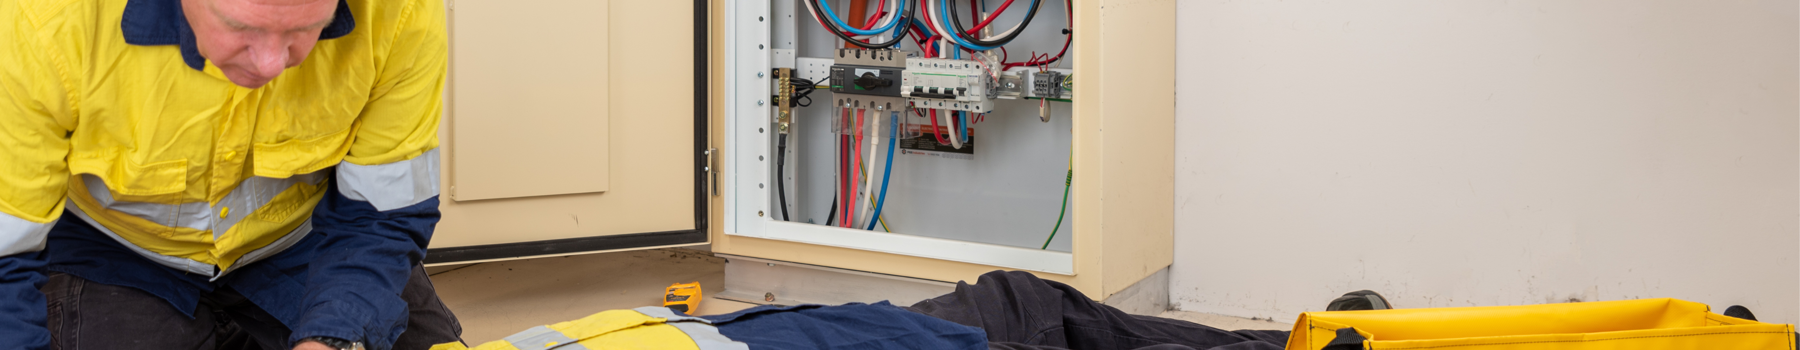 Perform Rescue From A Live Low Voltage Panel & CPR IMAGE